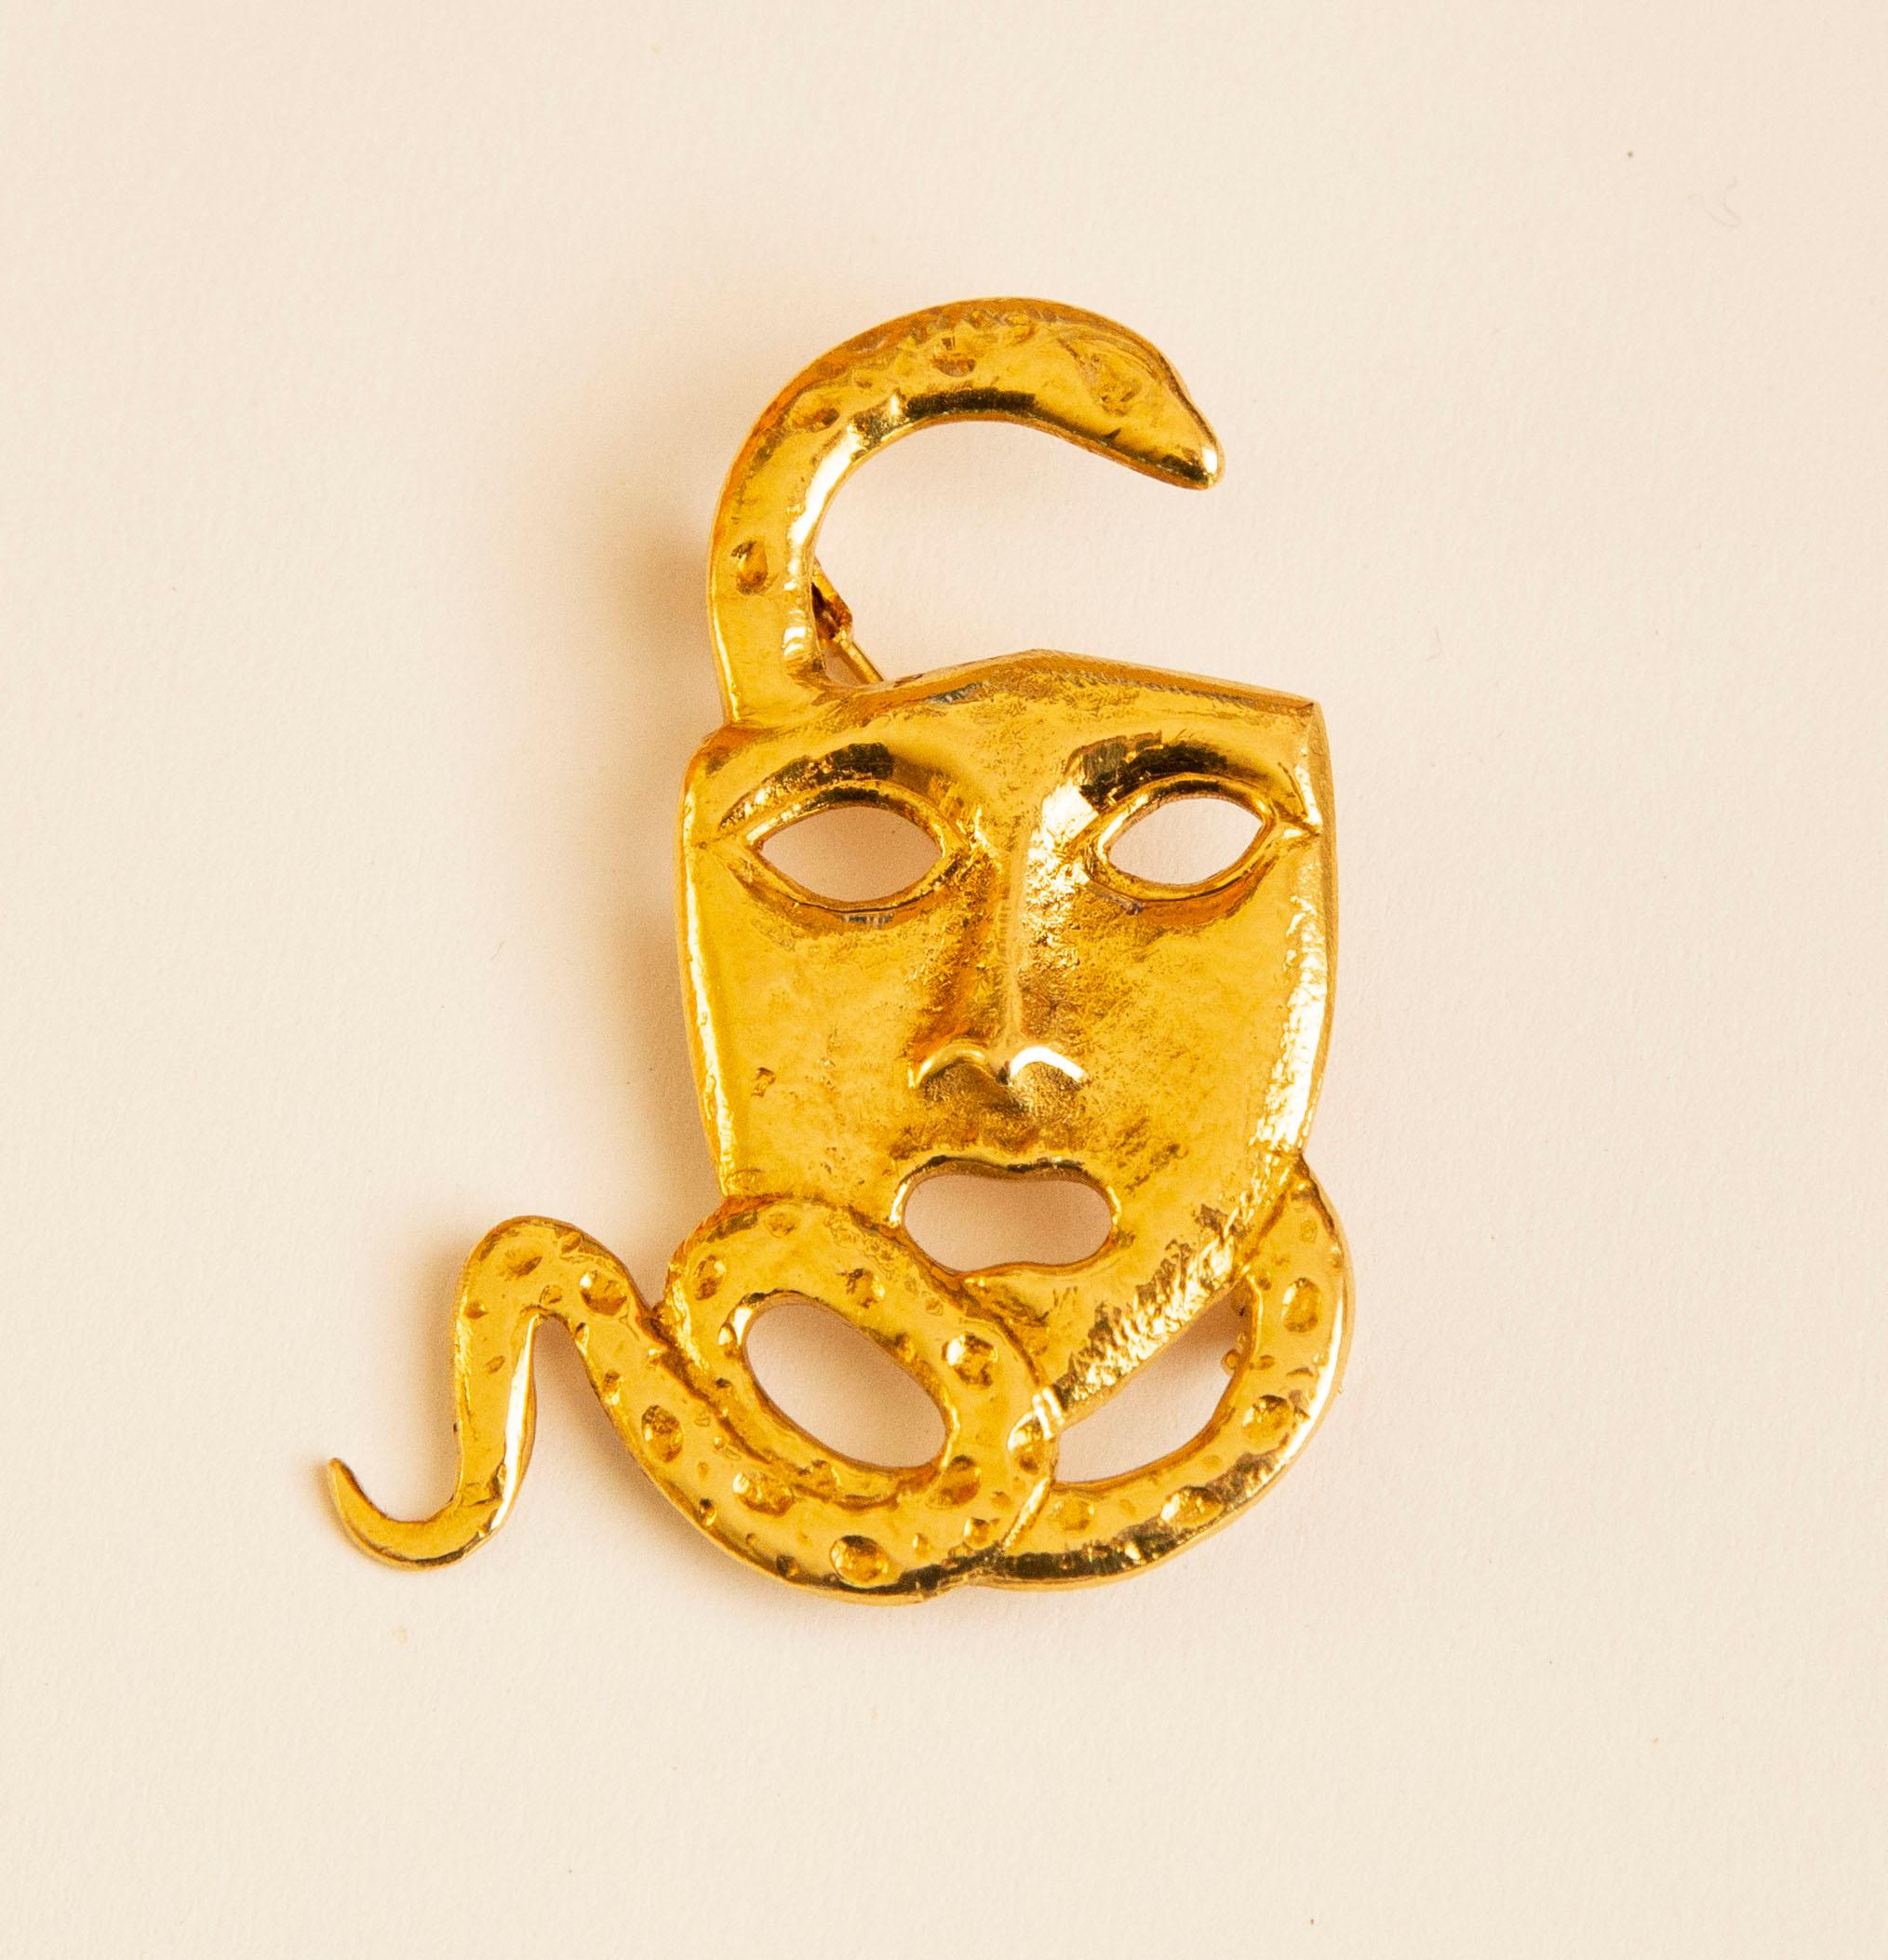 Women's or Men's 18 Karat Yellow Gold Brooch Designed as an Actor Drama Mask with a Snake For Sale